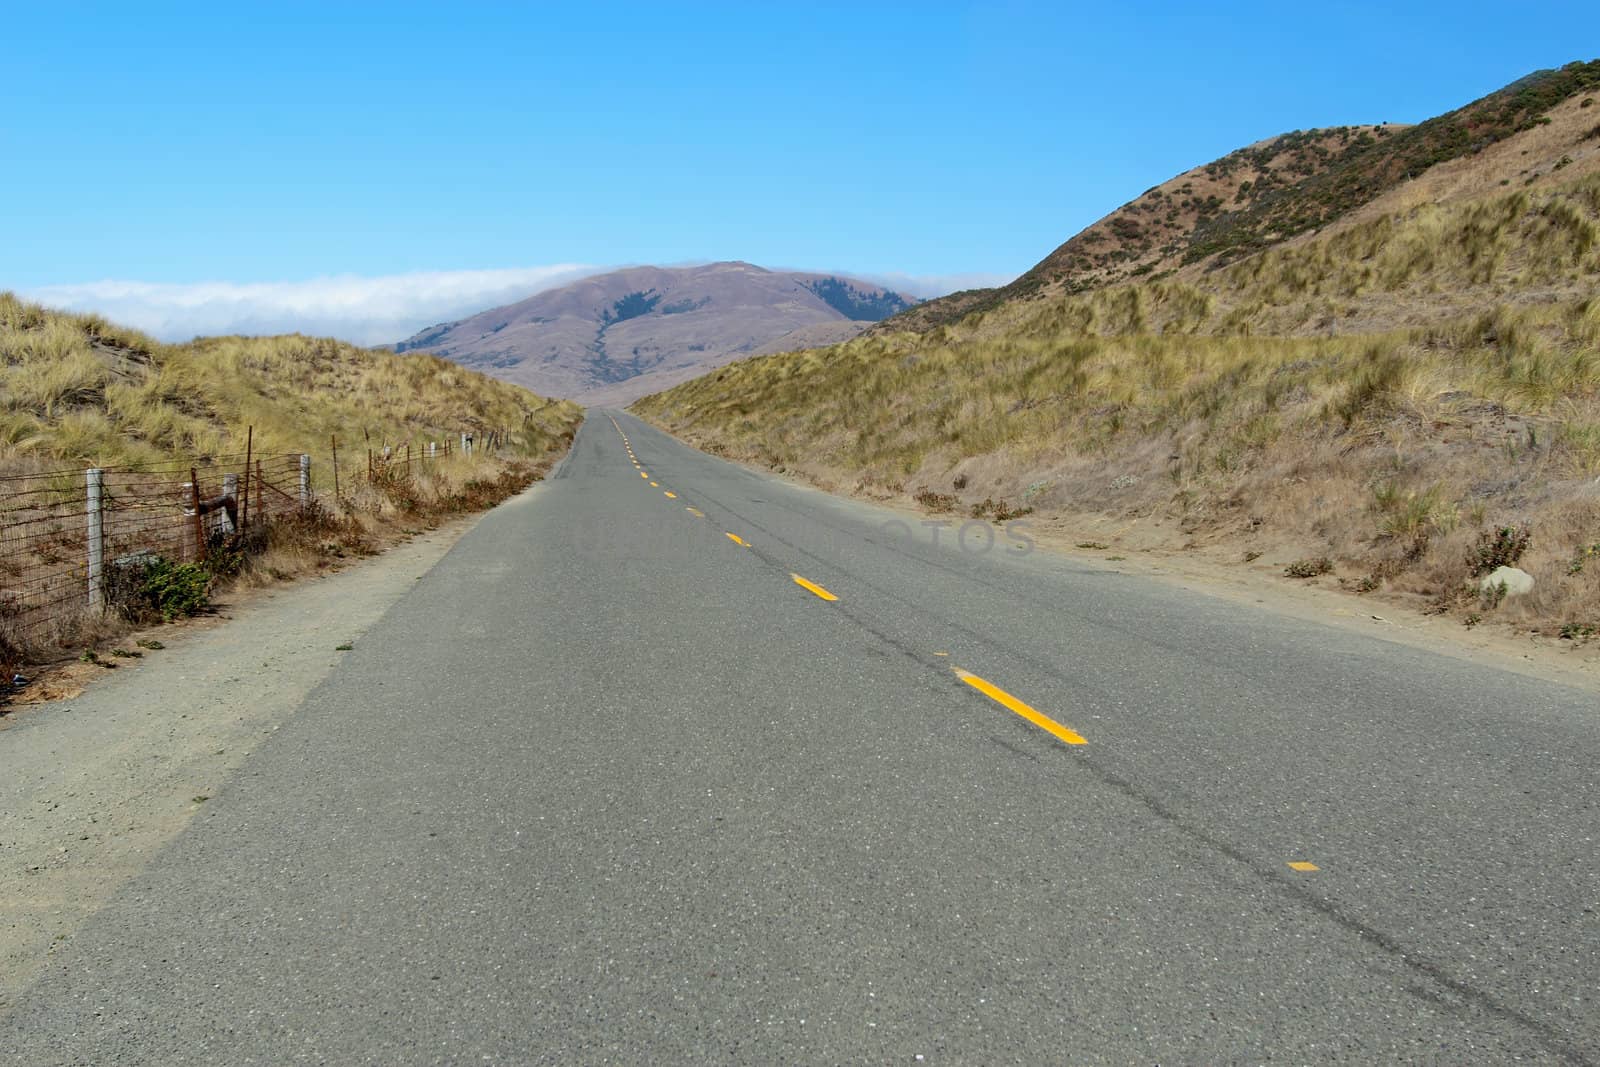 Desolate road along the Lost Coast of California by sgoodwin4813